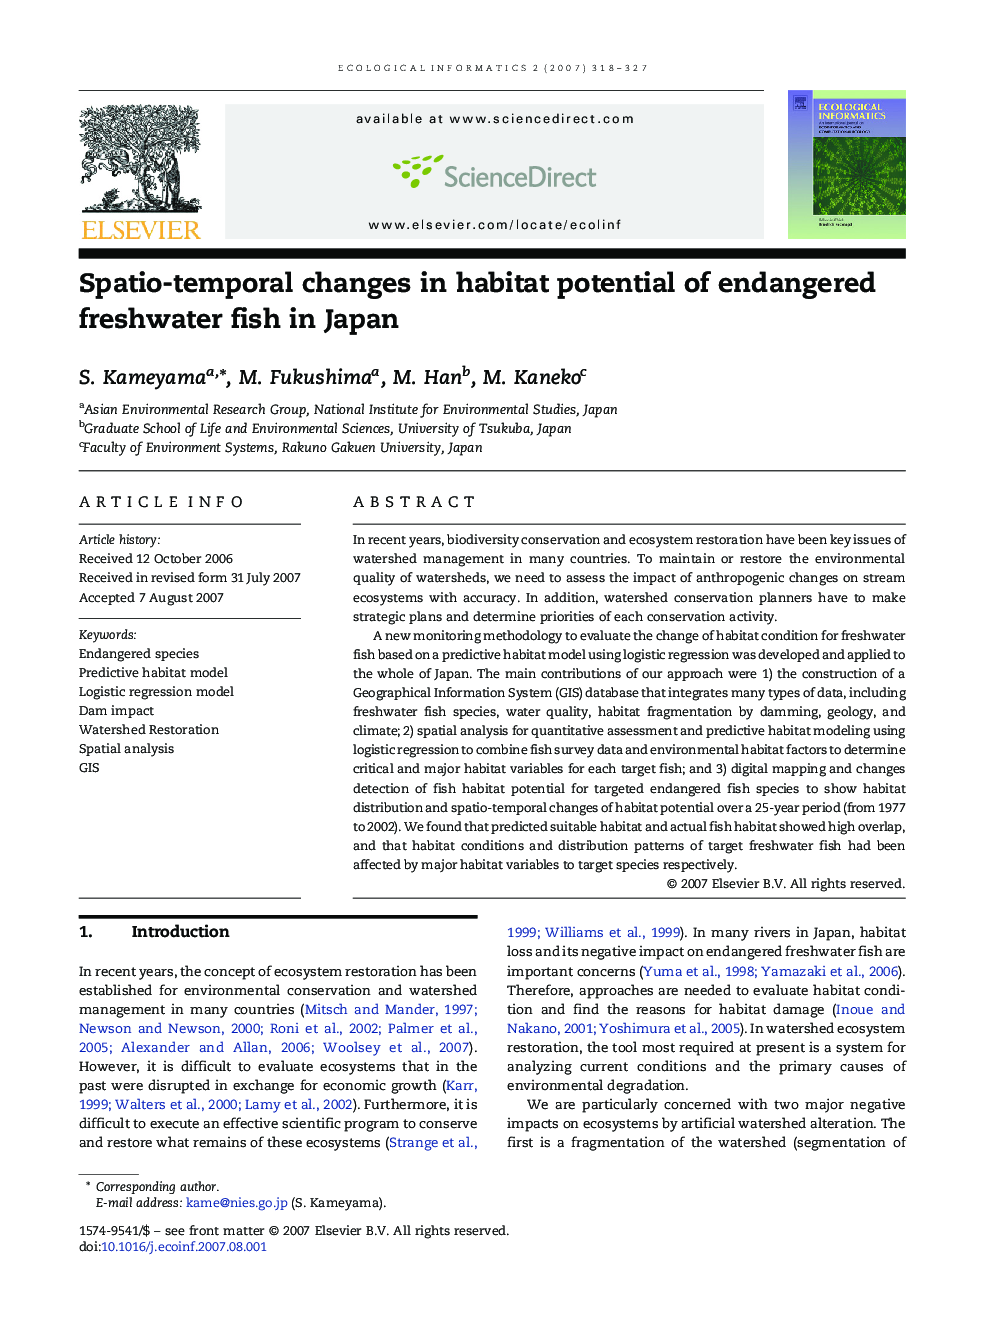 Spatio-temporal changes in habitat potential of endangered freshwater fish in Japan